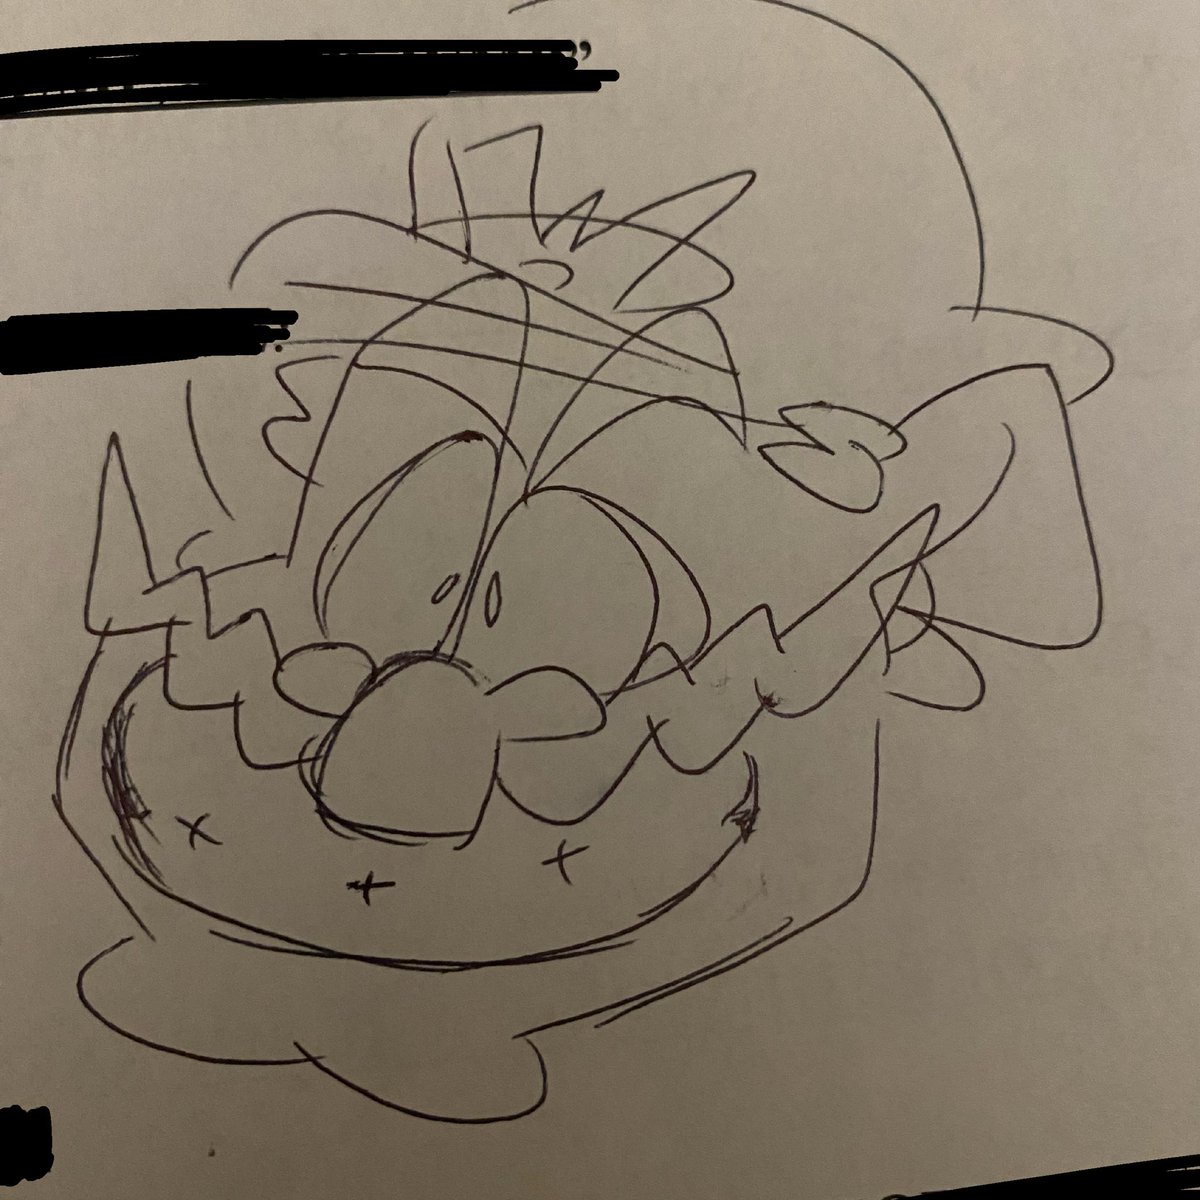 Drawing Wario everyday until there's a new Wario Land game day 1185. Doodle on my study guide